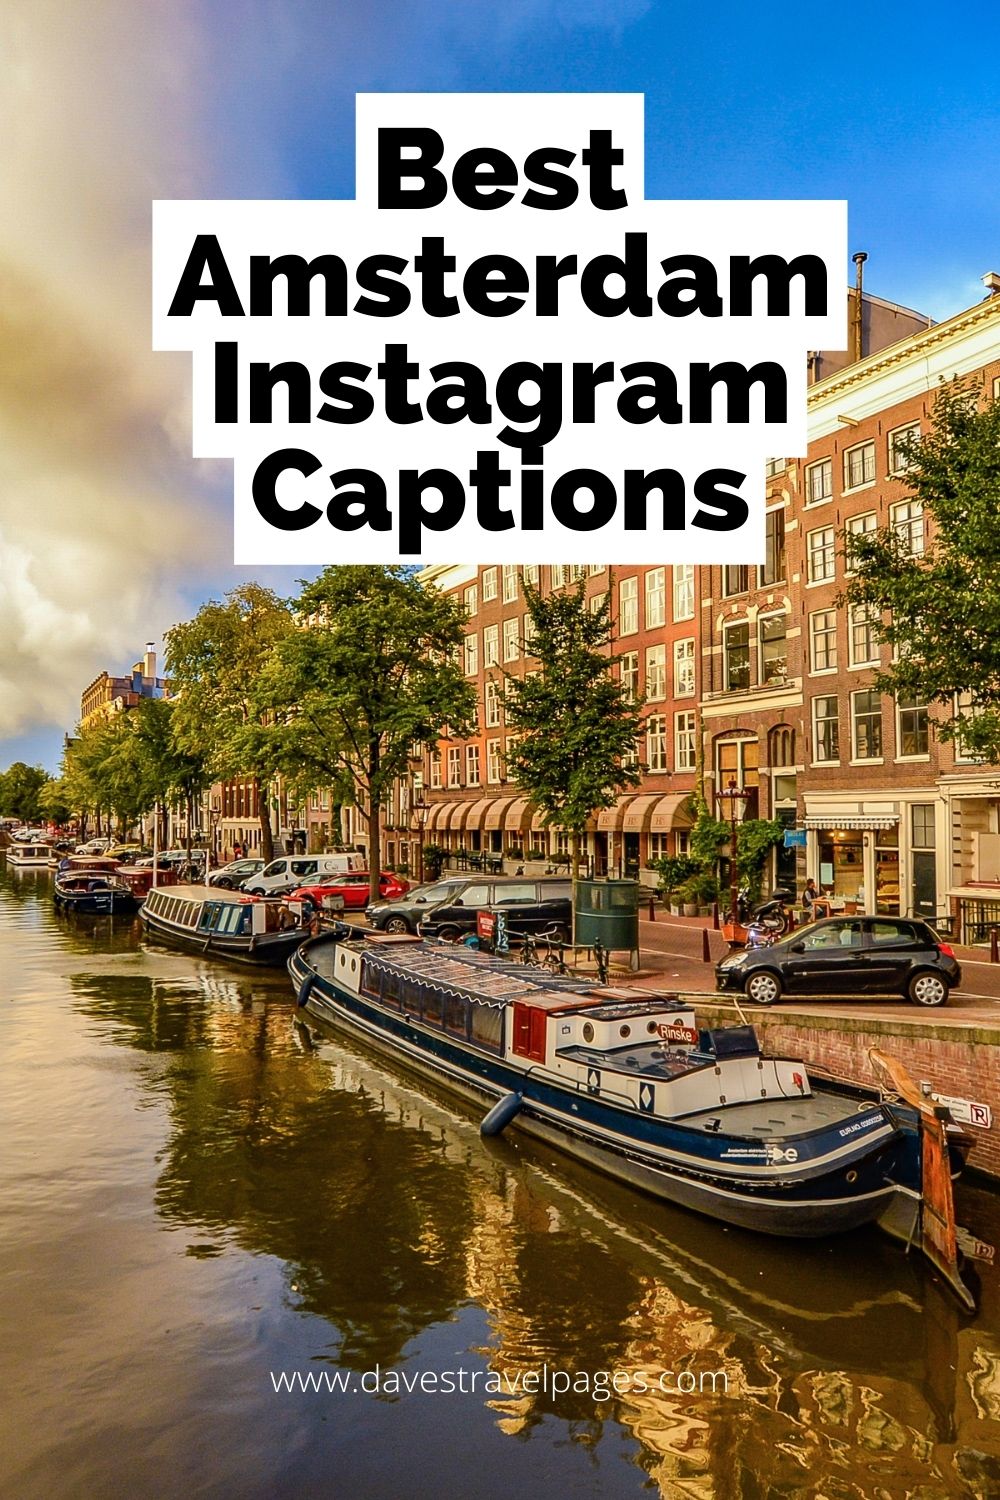 Instagram Captions About Amsterdam